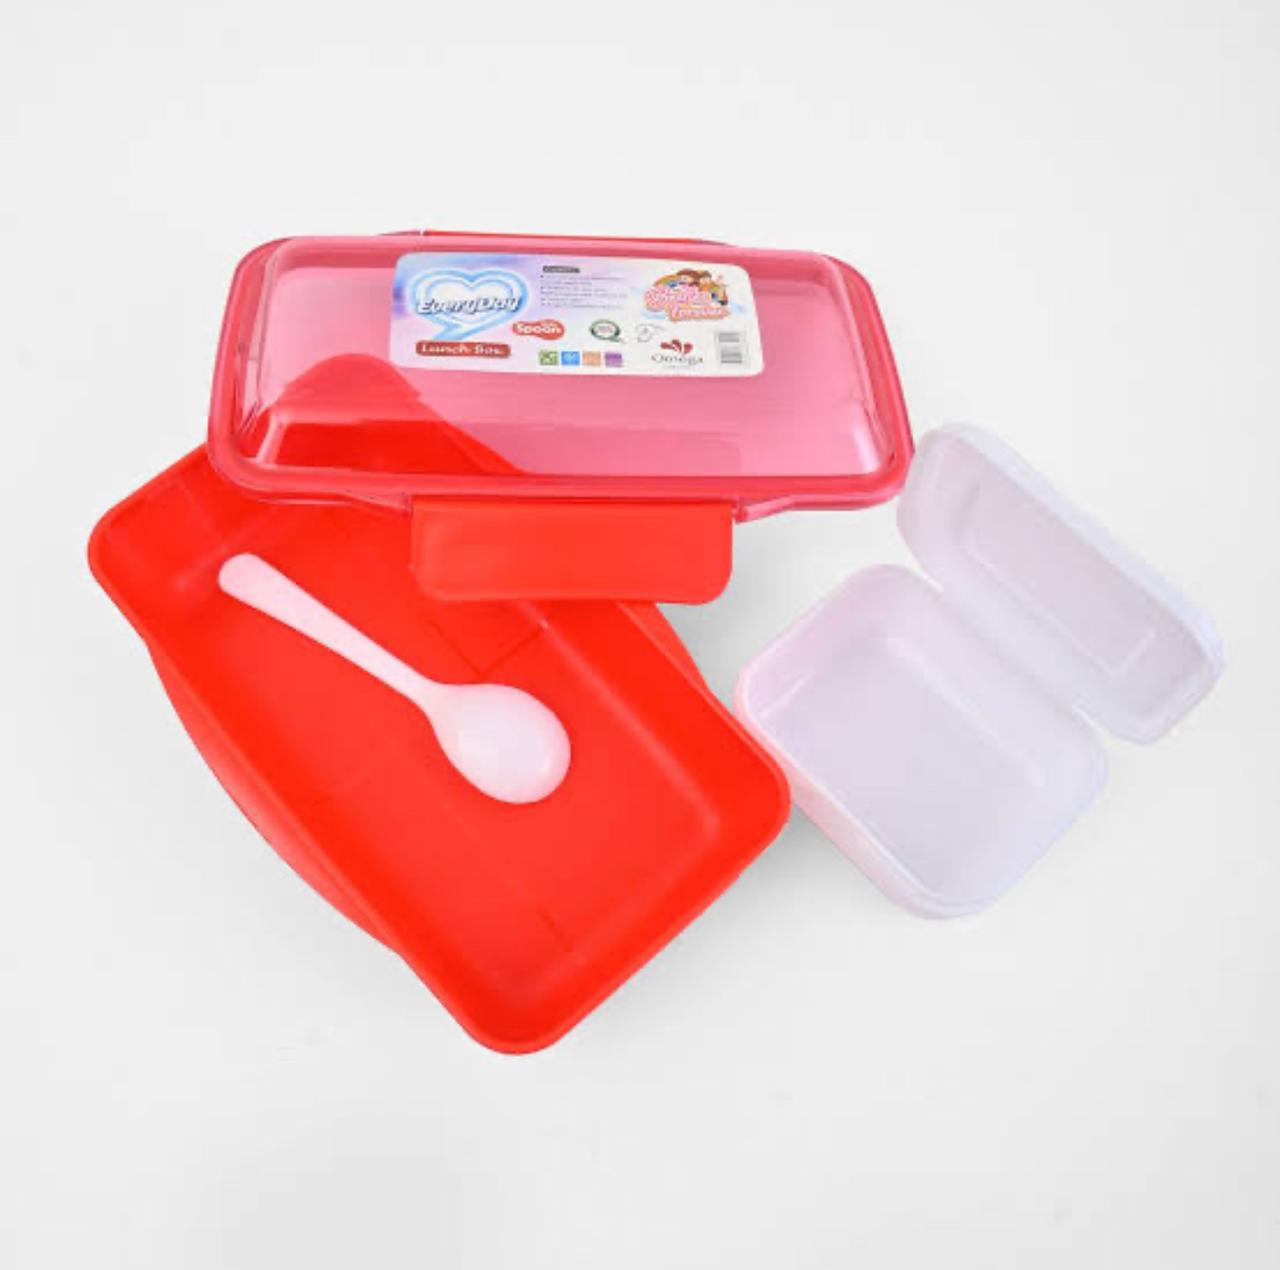 Omega lucky air tight lunch box